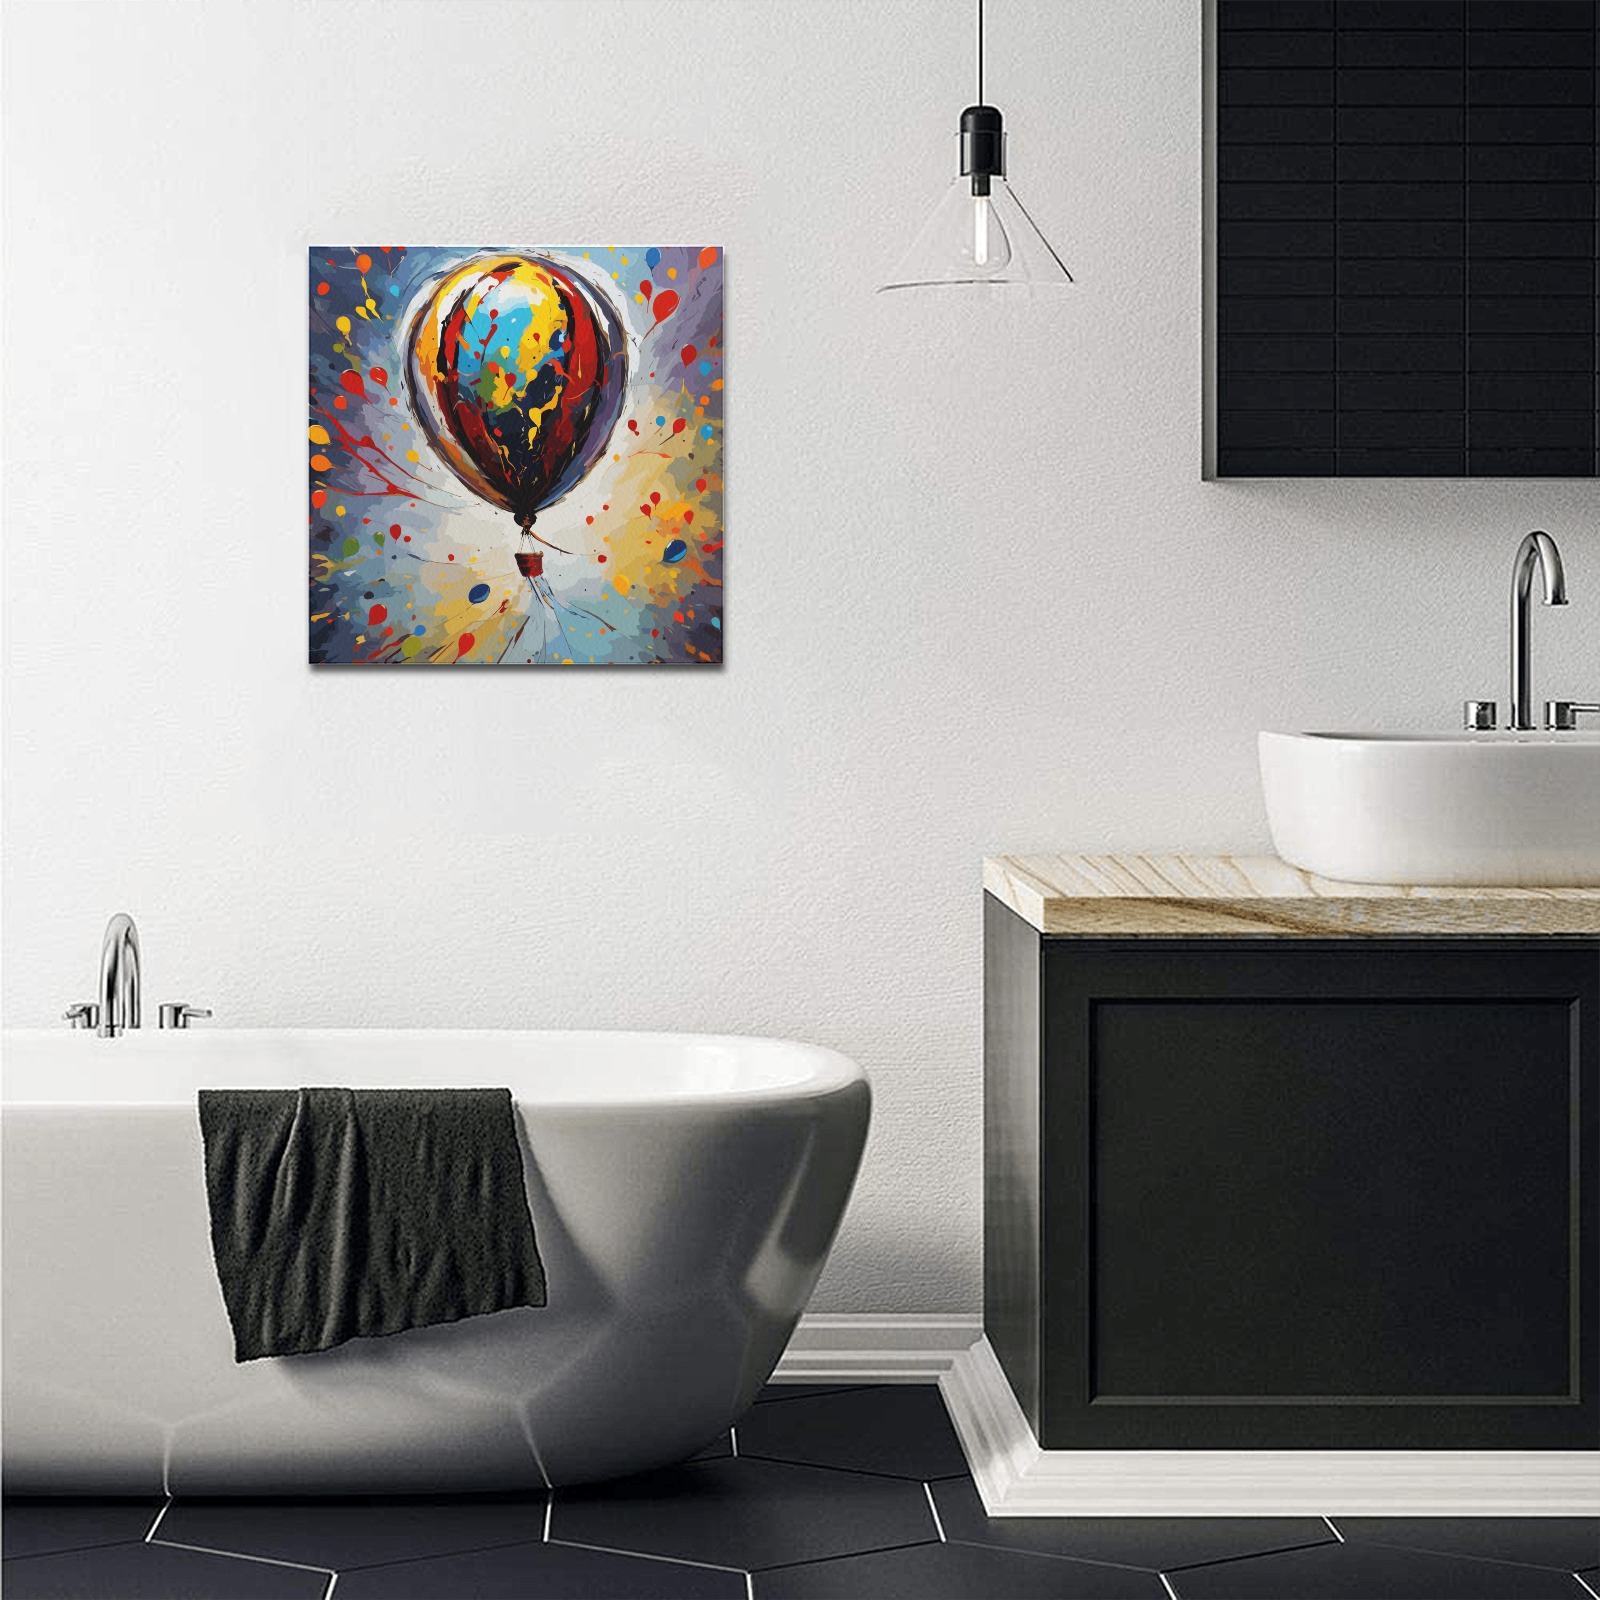 Hot air balloon in the air. Colorful abstract art. Upgraded Canvas Print 16"x16"